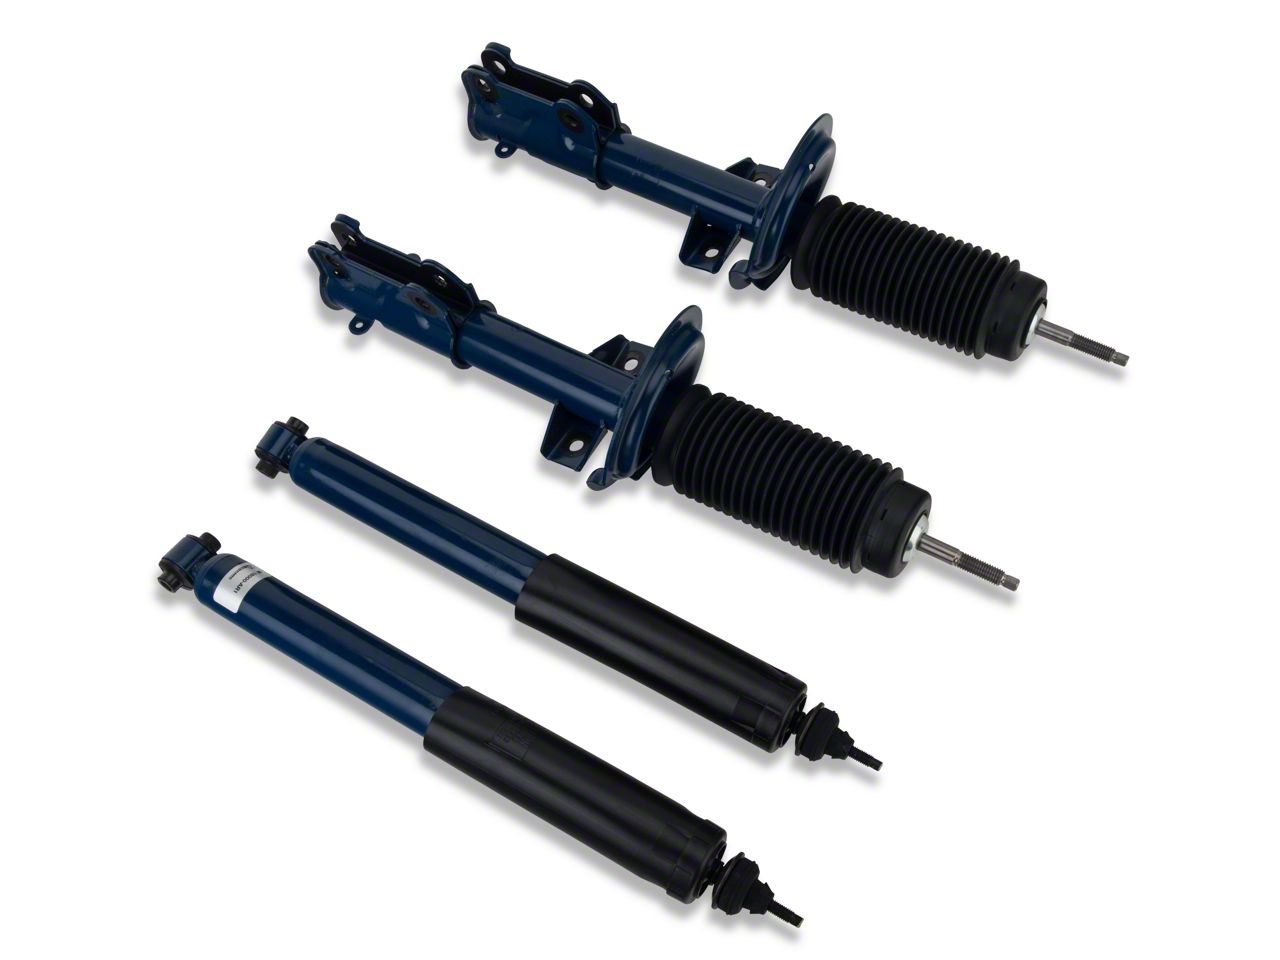 INEEDUP Complete Coilovers Struts Shocks Replacement Fit for 2005 2006 2007 2008 2009 2010 2011 2012 2013 2014 Ford Mustang